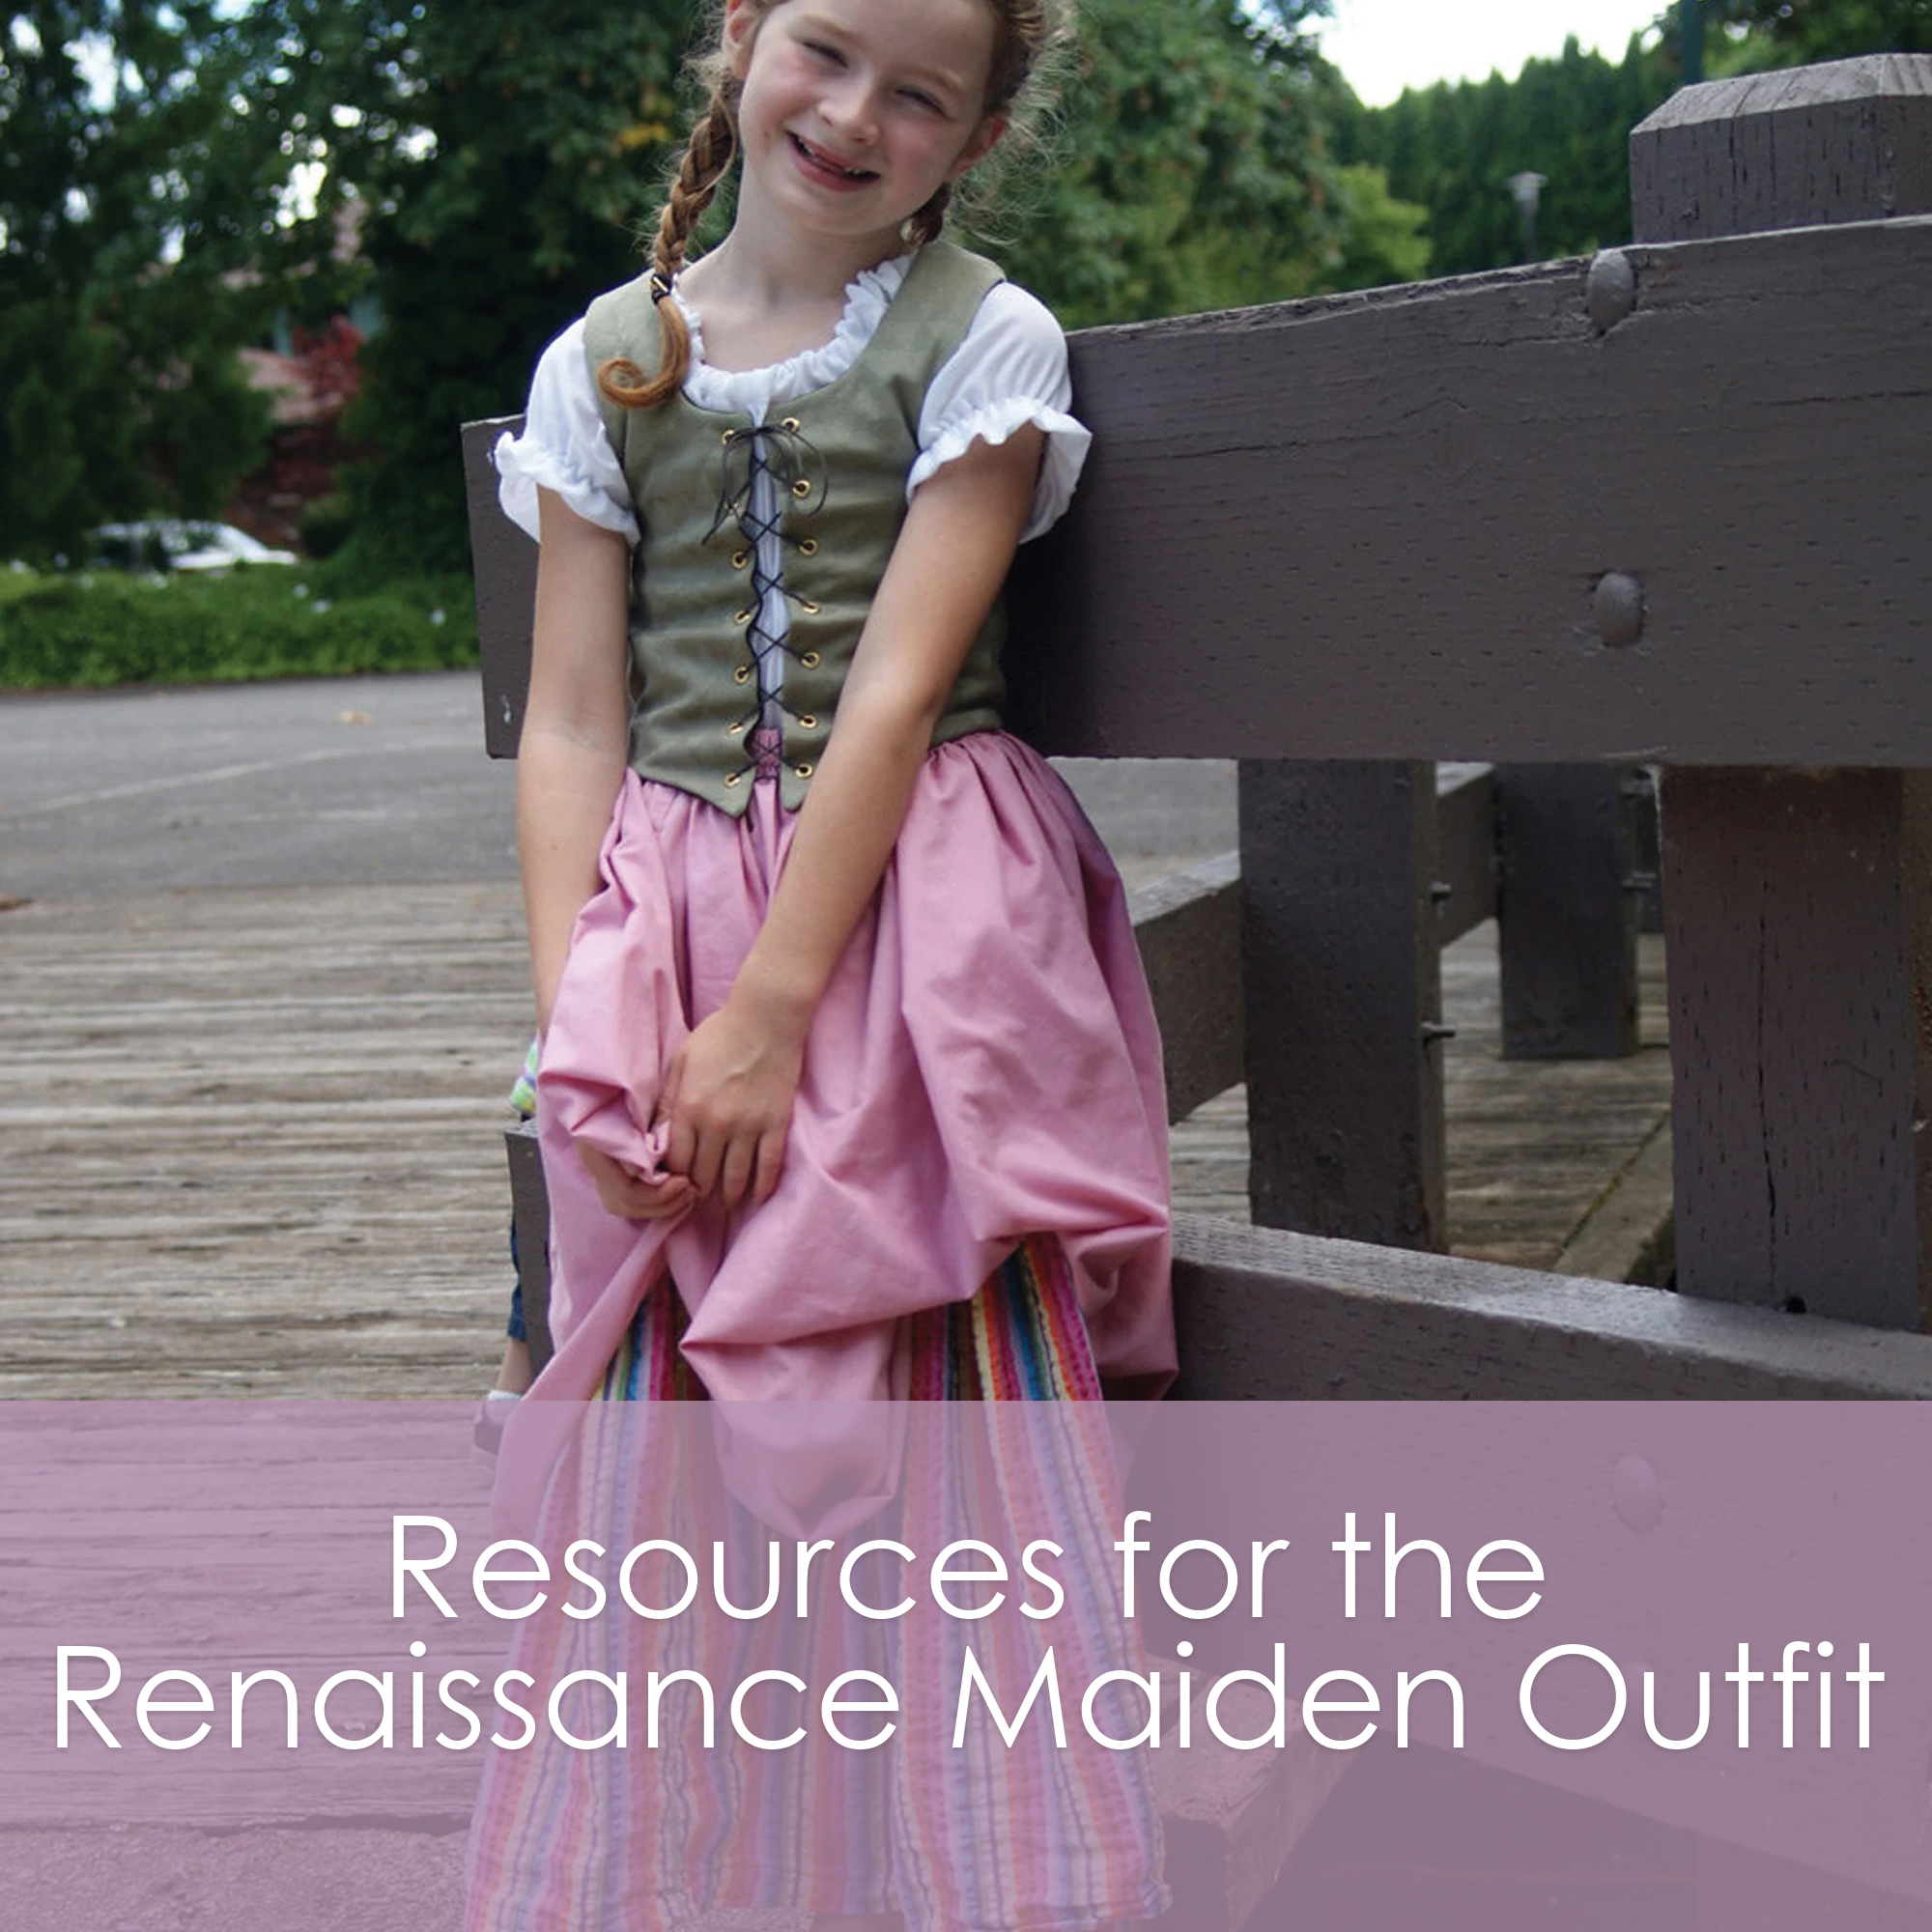 Resources for the Renaissance Maiden Outfit Sewing Pattern - from Muse of the Morning